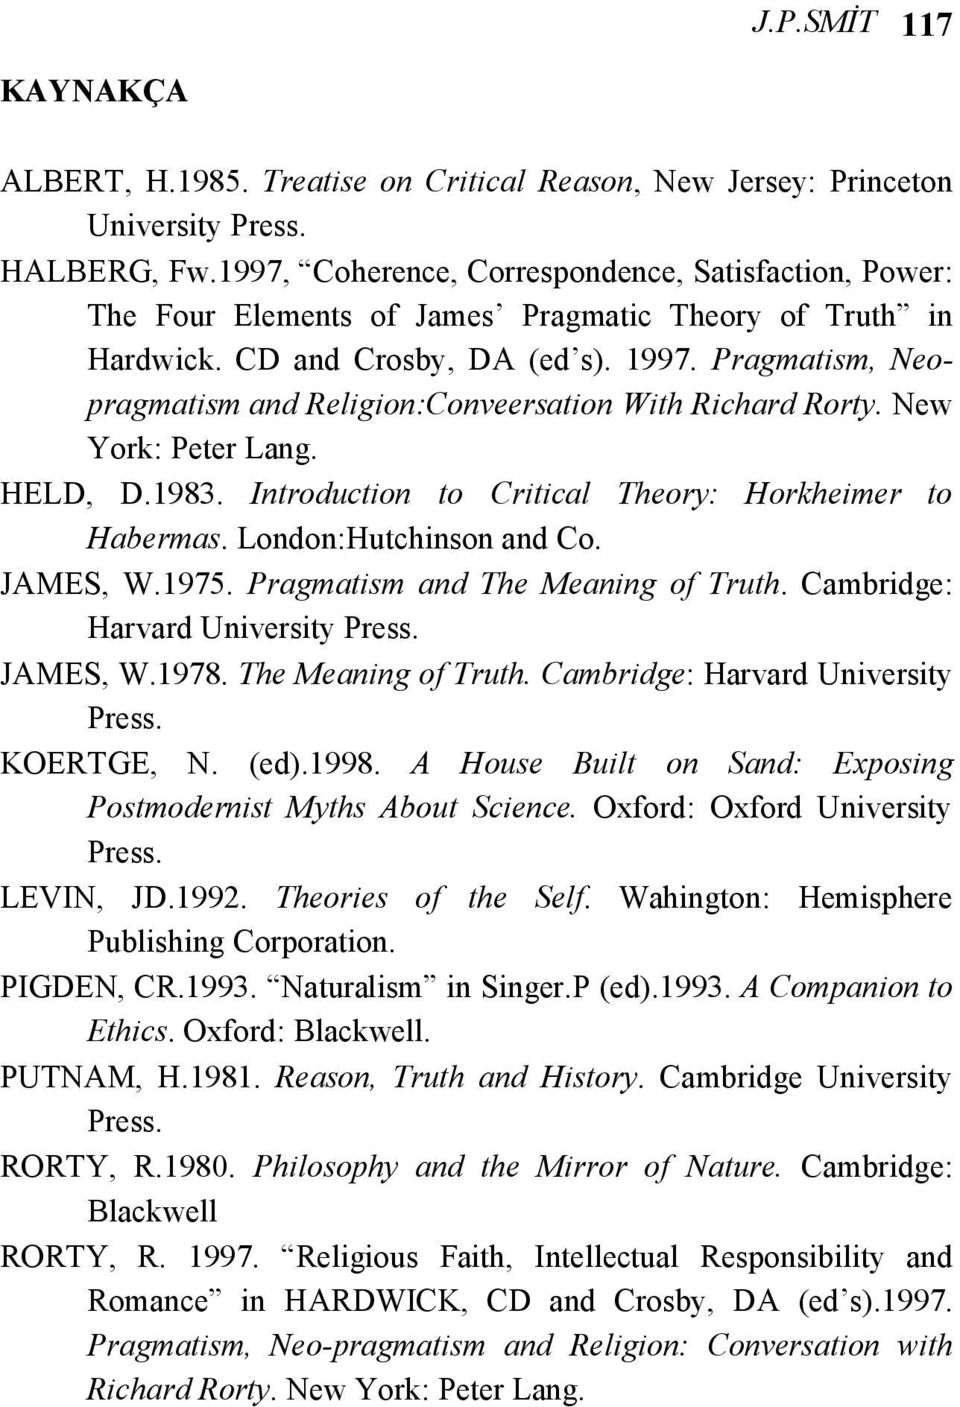 Pragmatism, Neopragmatism and Religion:Conveersation With Richard Rorty. New York: Peter Lang. HELD, D.1983. Introduction to Critical Theory: Horkheimer to Habermas. London:Hutchinson and Co.